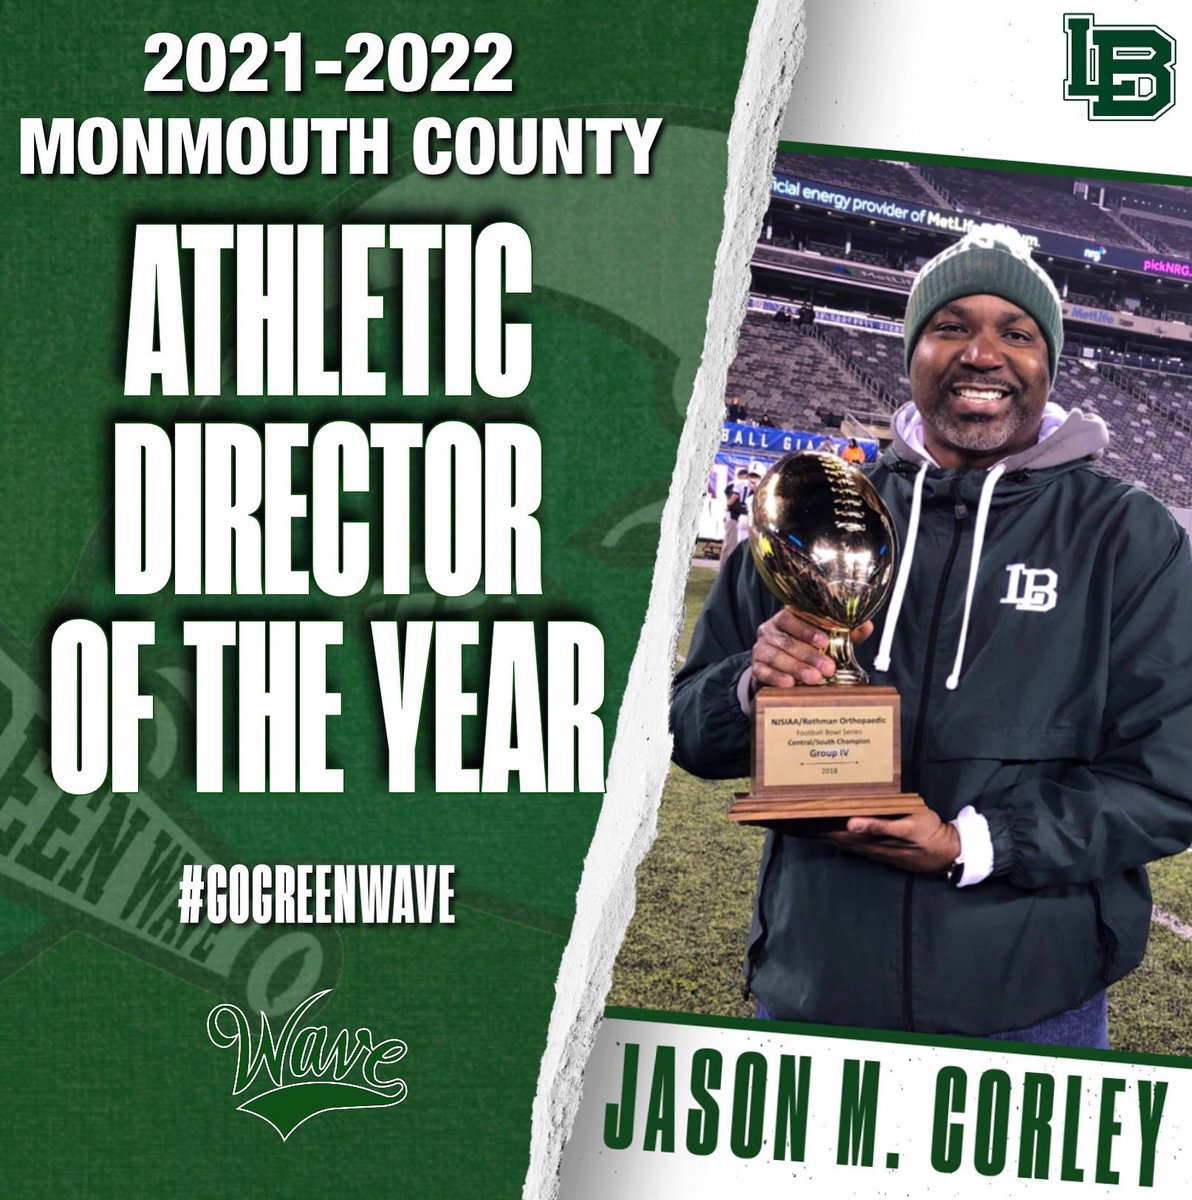 CONGRATULATIONS MR. CORLEY ON BEING THE 2021-2022 MONMOUTH COUNTY ATHLETIC DIRECTOR OF THE YEAR! 🌊💚

#WavePride #LBProud #GreenWave #WaveAthletics #shoreconference #LBStrong